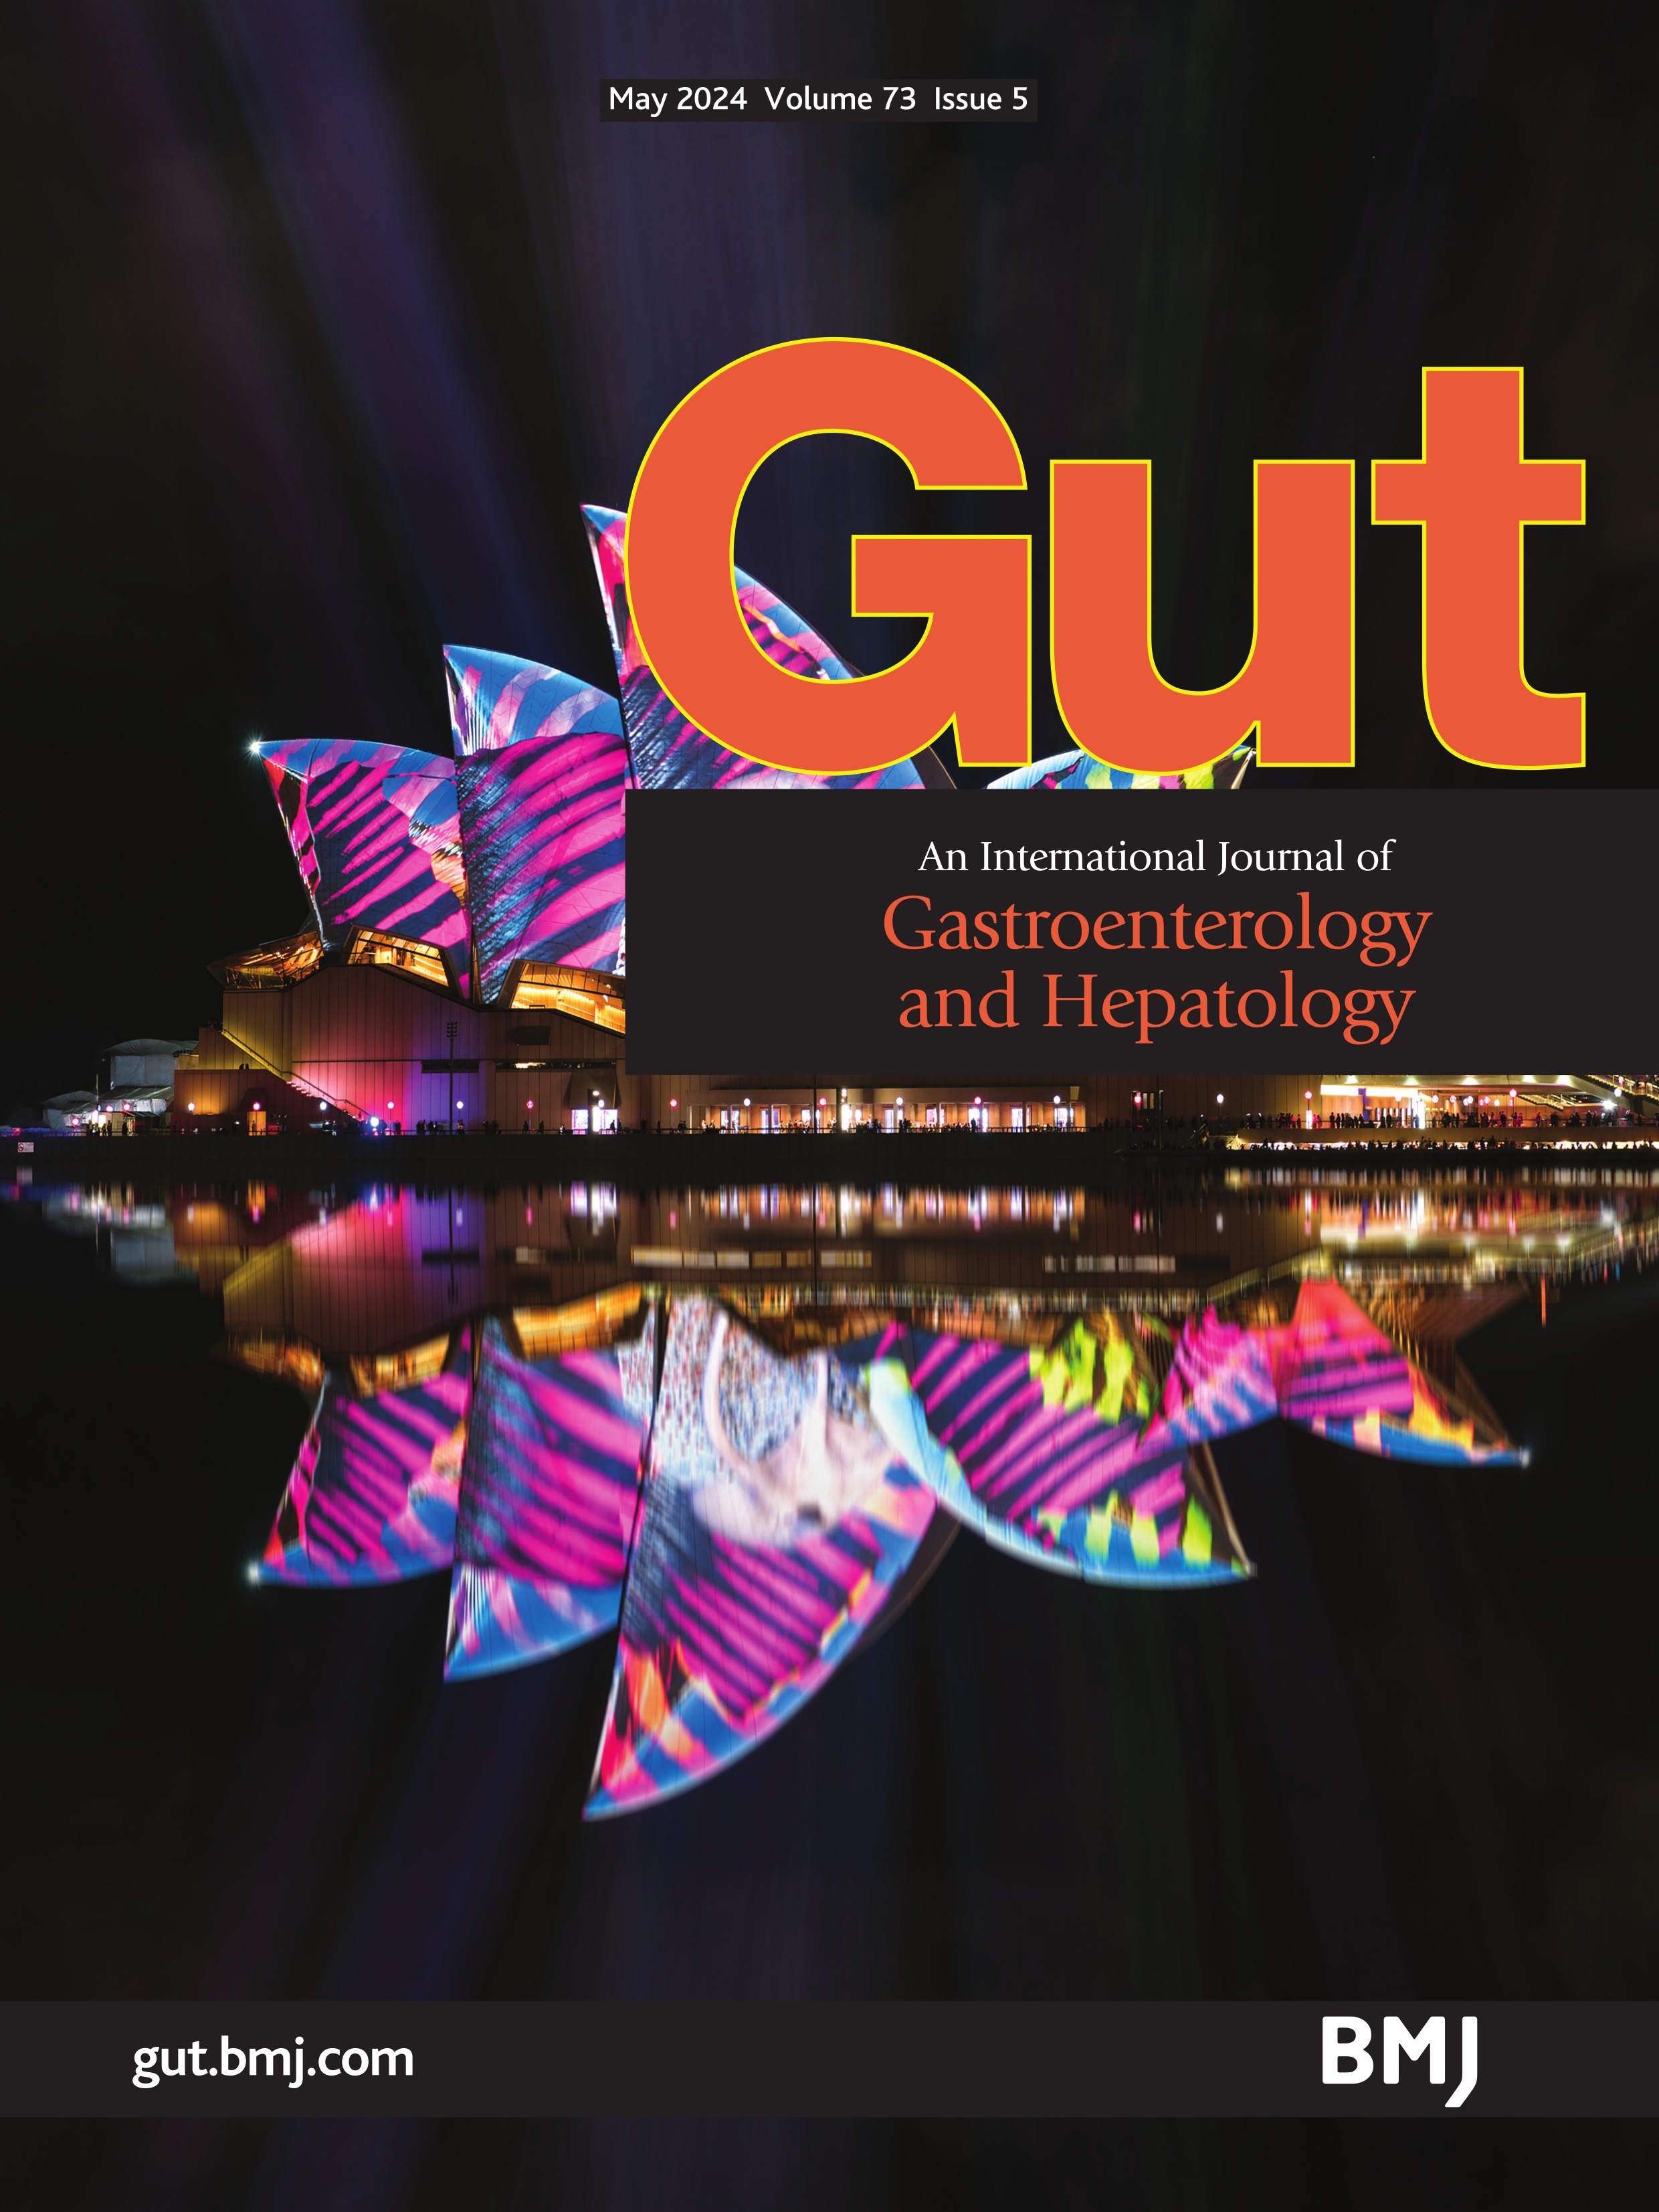 Glucagon-like peptide-1 receptor agonists to treat chronic liver disease: real-world evidence or ambiguity?